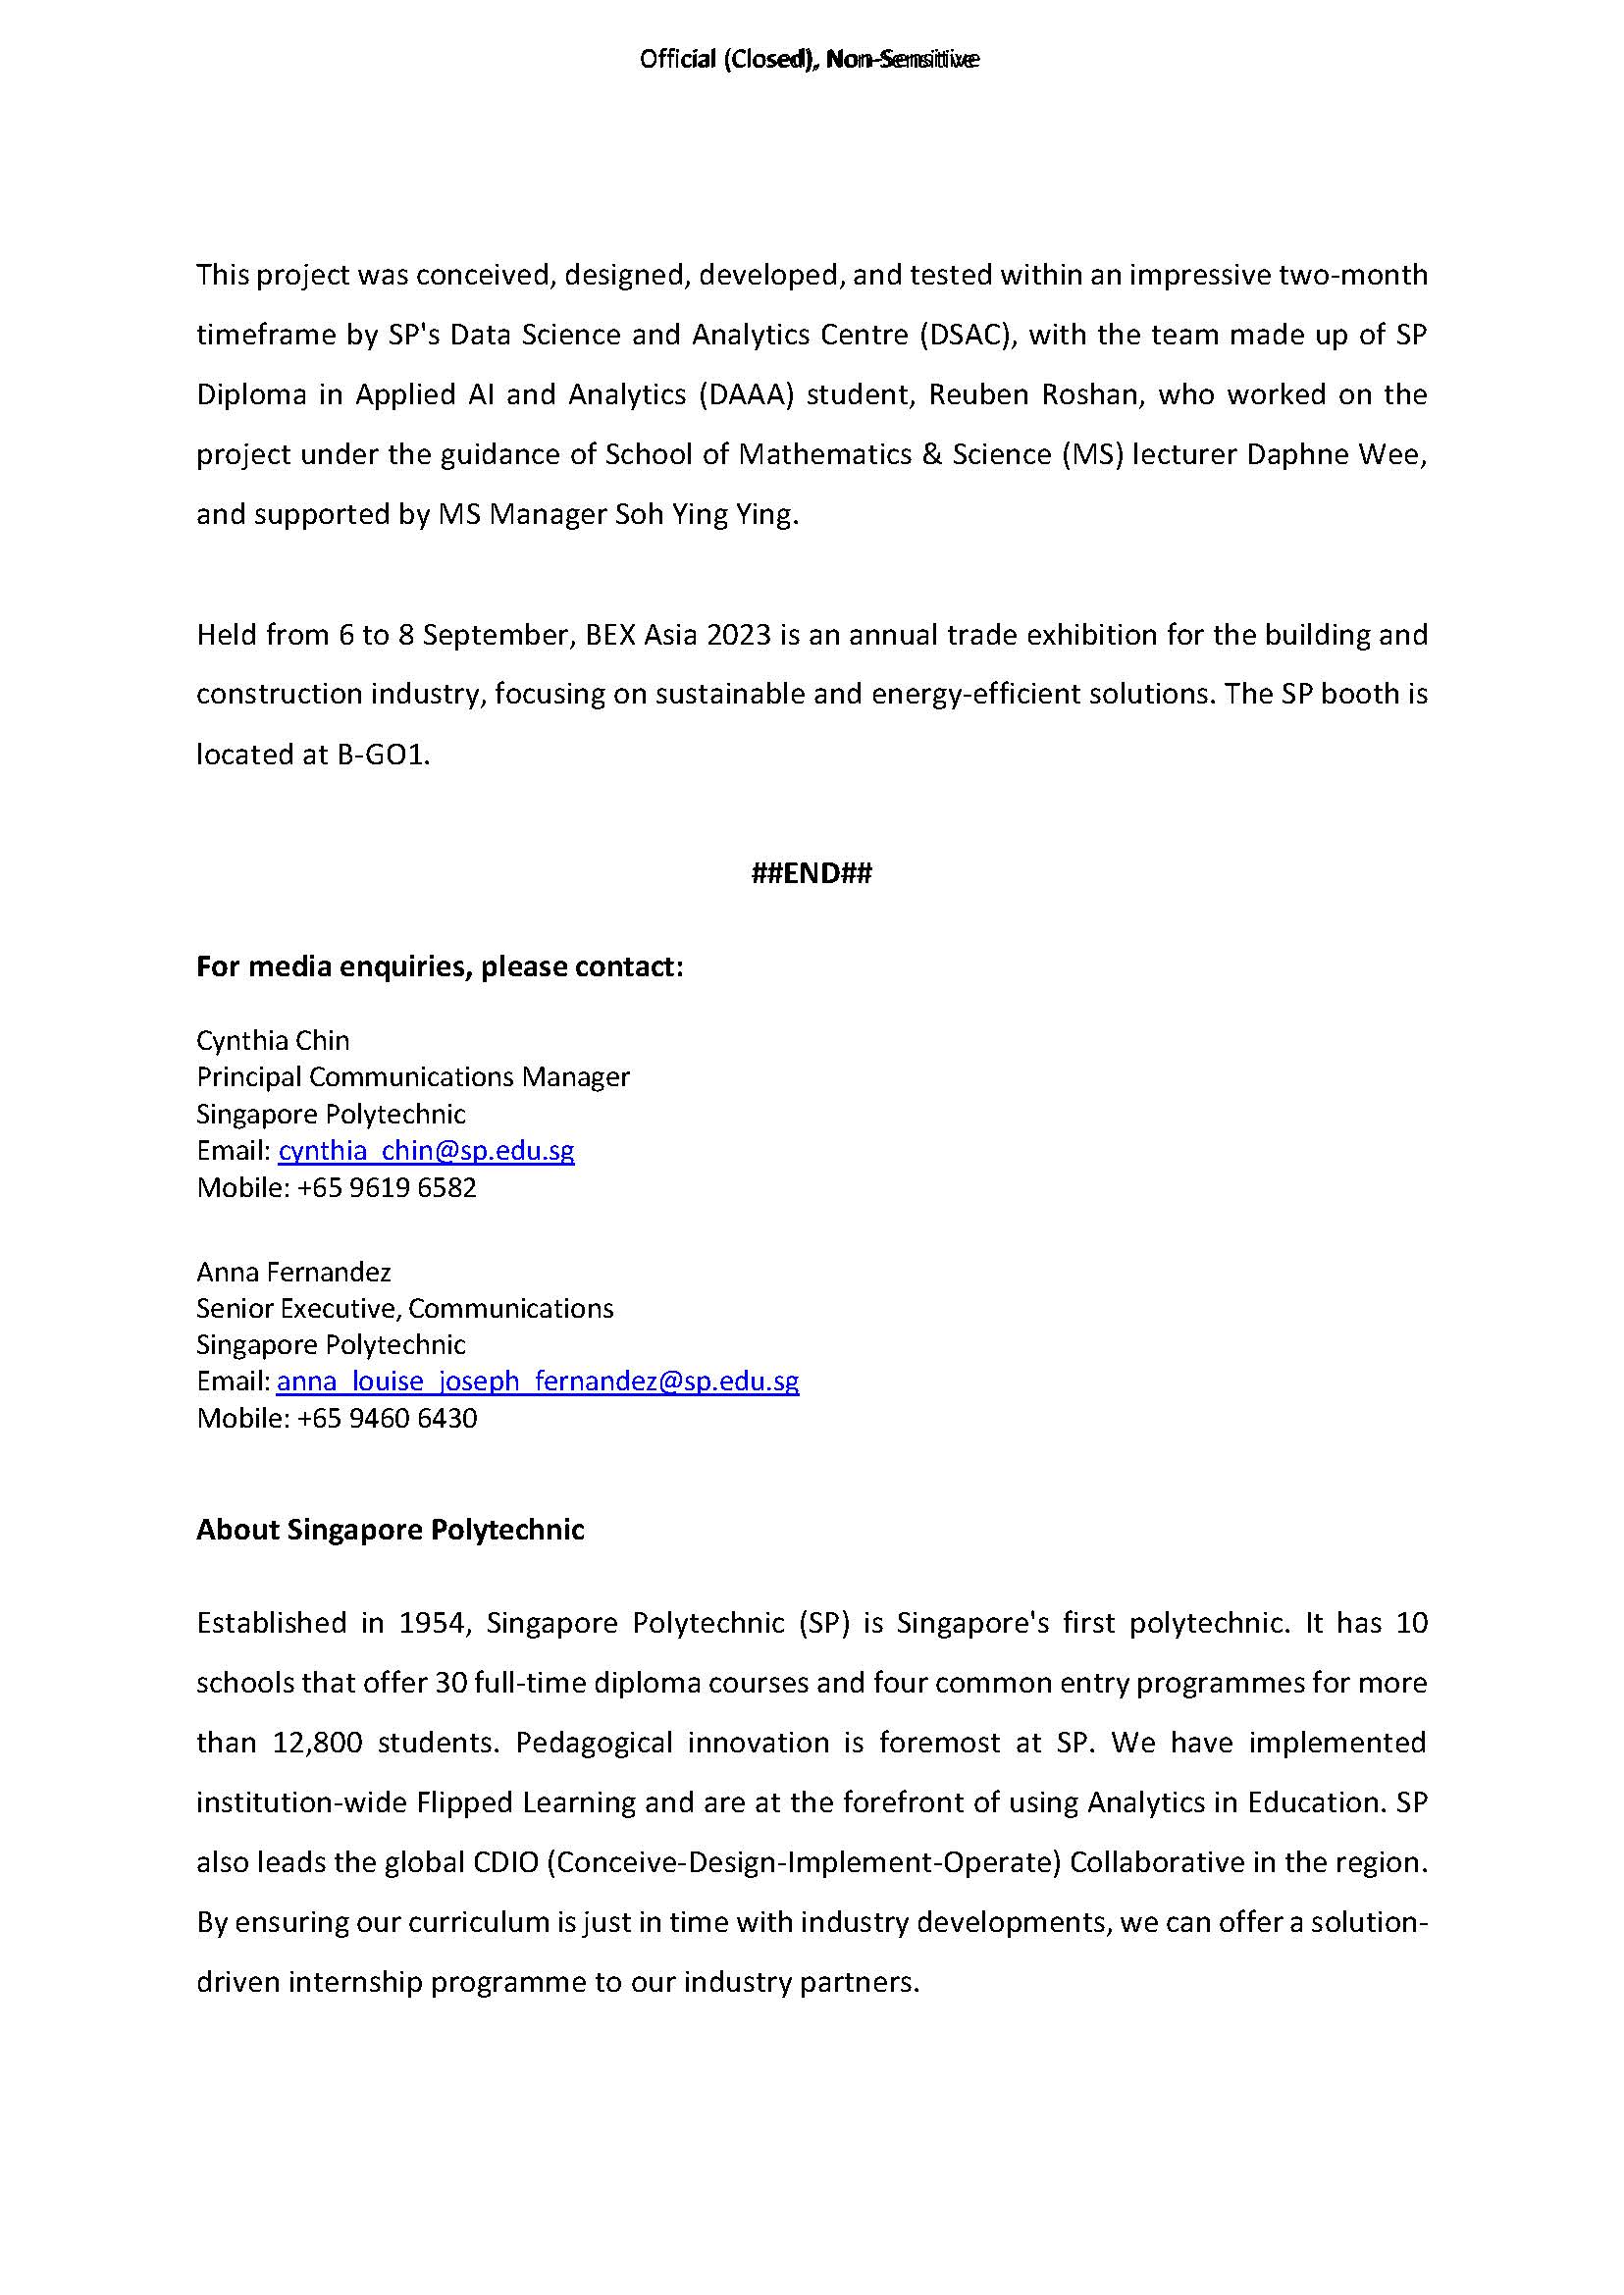 MEDIA RELEASE-Singapore Polytechnic launches First Decarbonisation Playbook here for education institutions_060923_Page_3